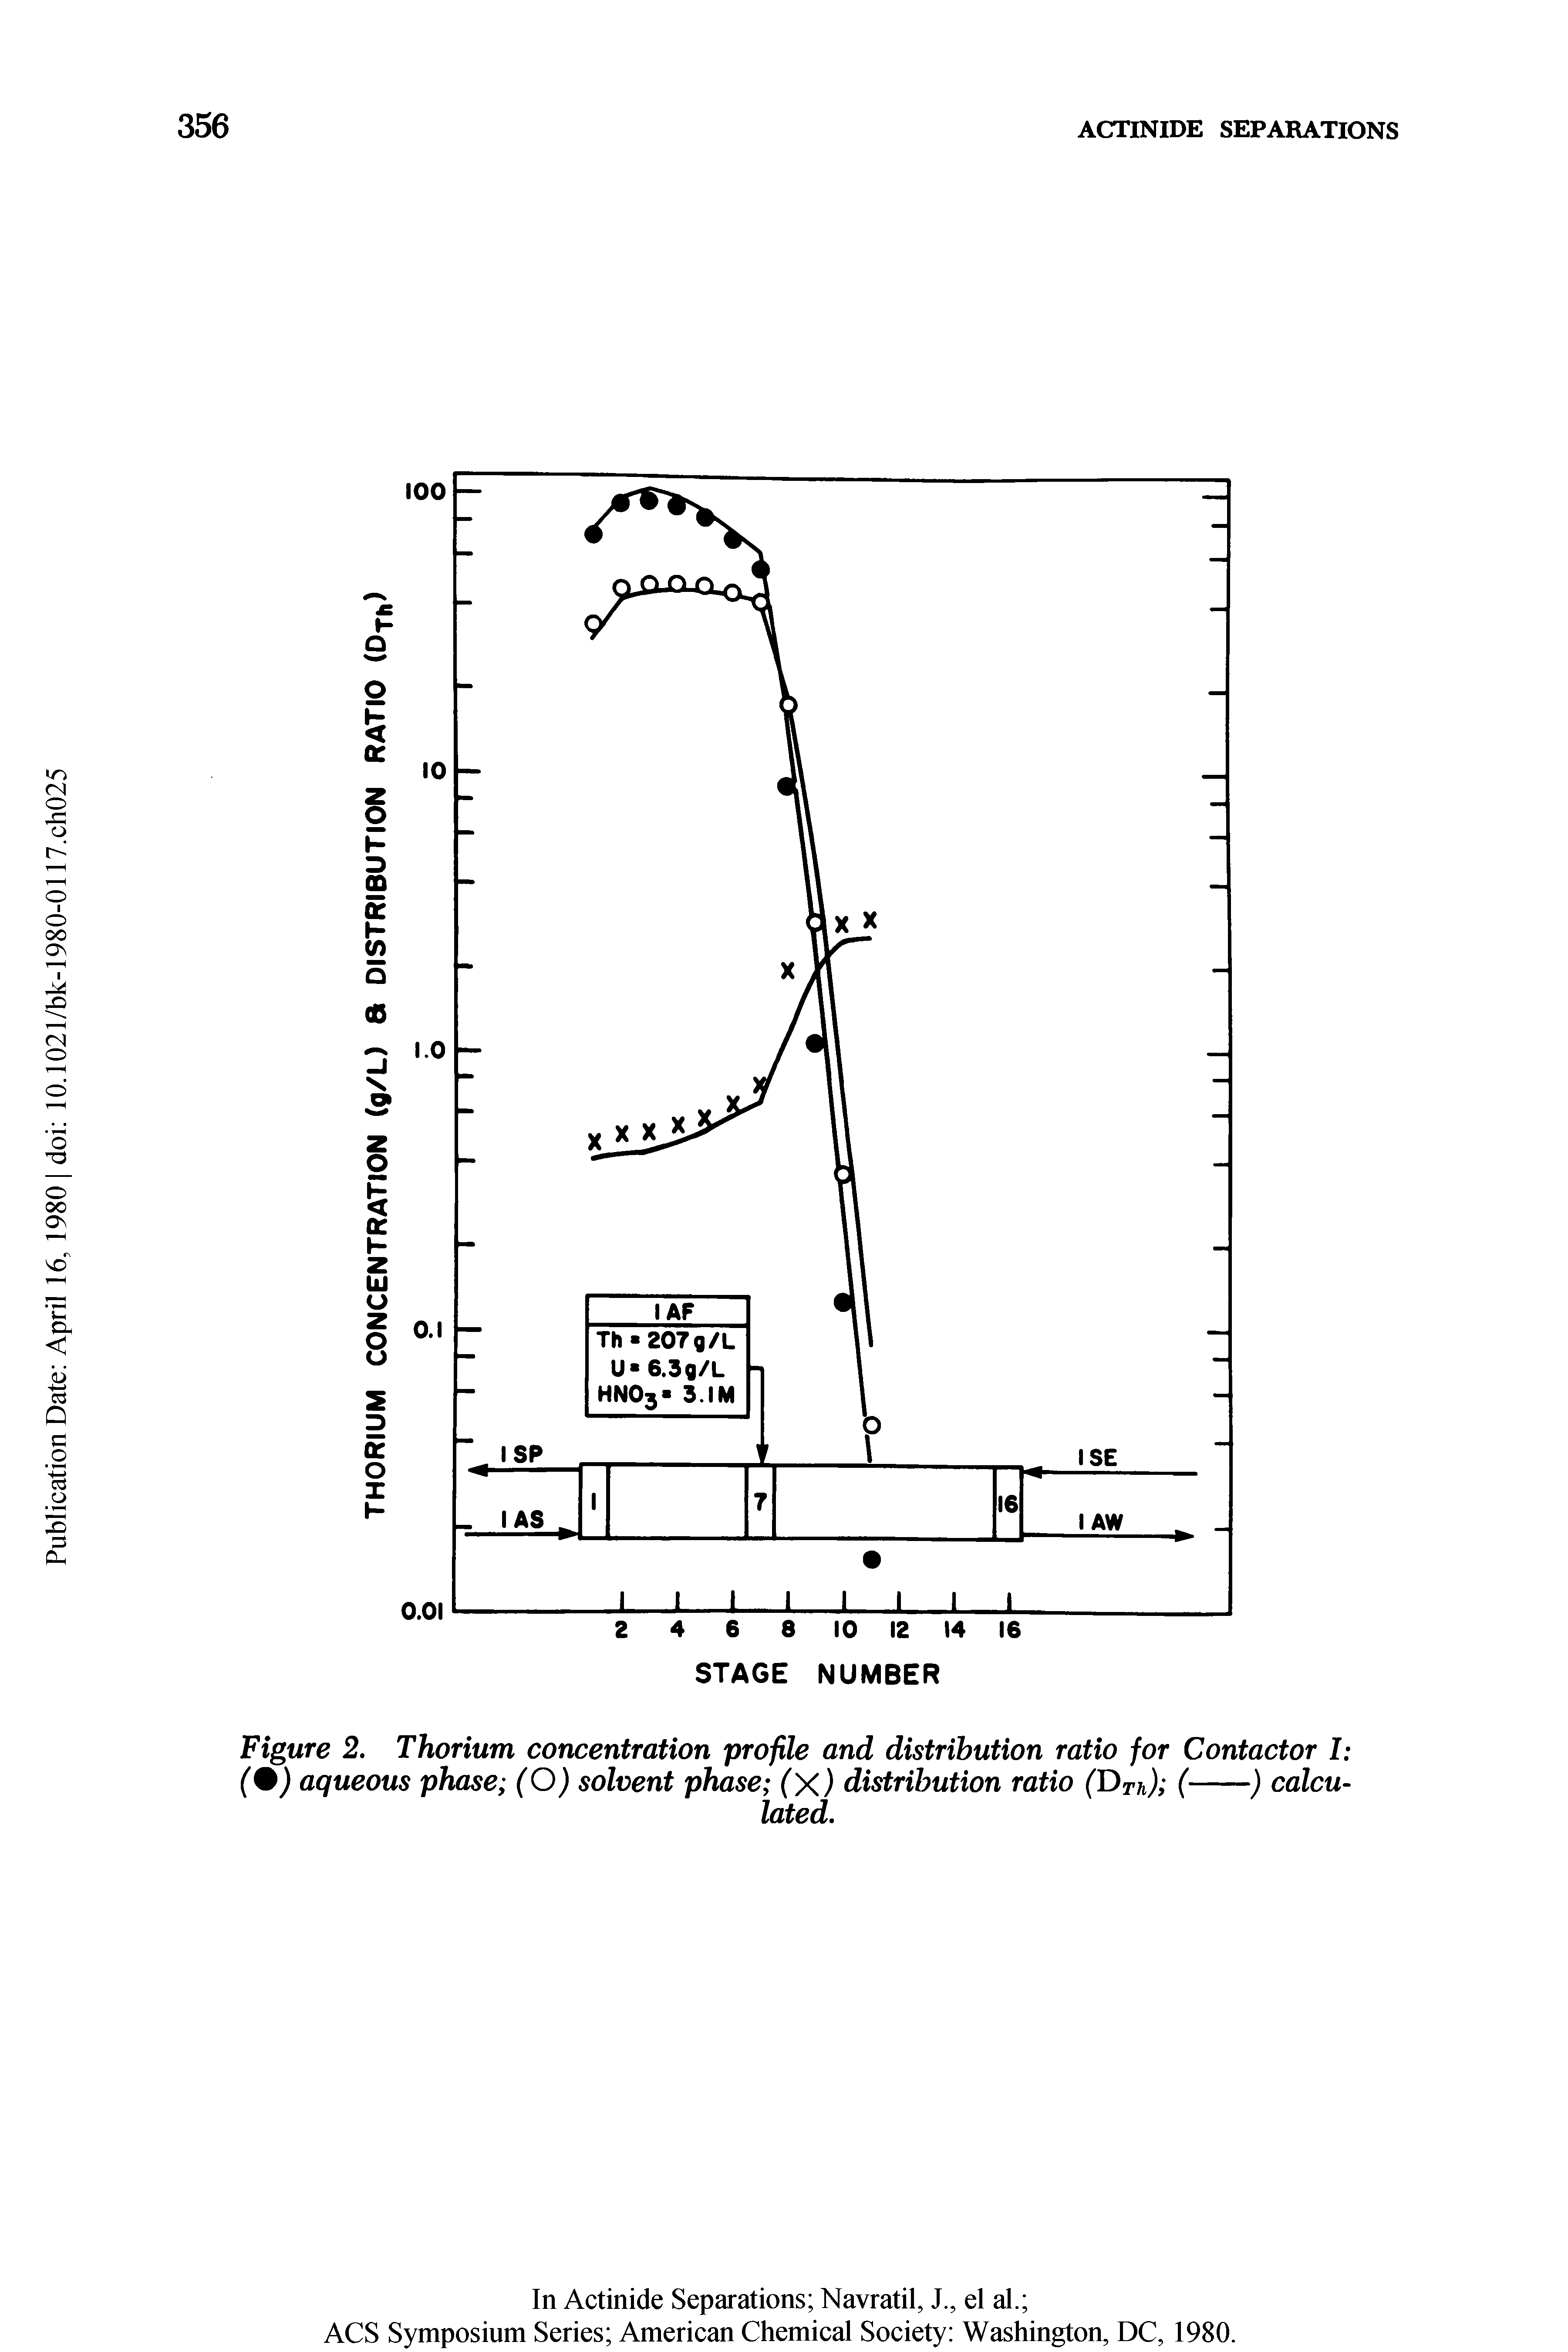 Figure 2. Thorium concentration profile and distribution ratio for Contactor I (%) aqueous phase (O) solvent phase (X) distribution ratio (DTn) (------) calcu-...